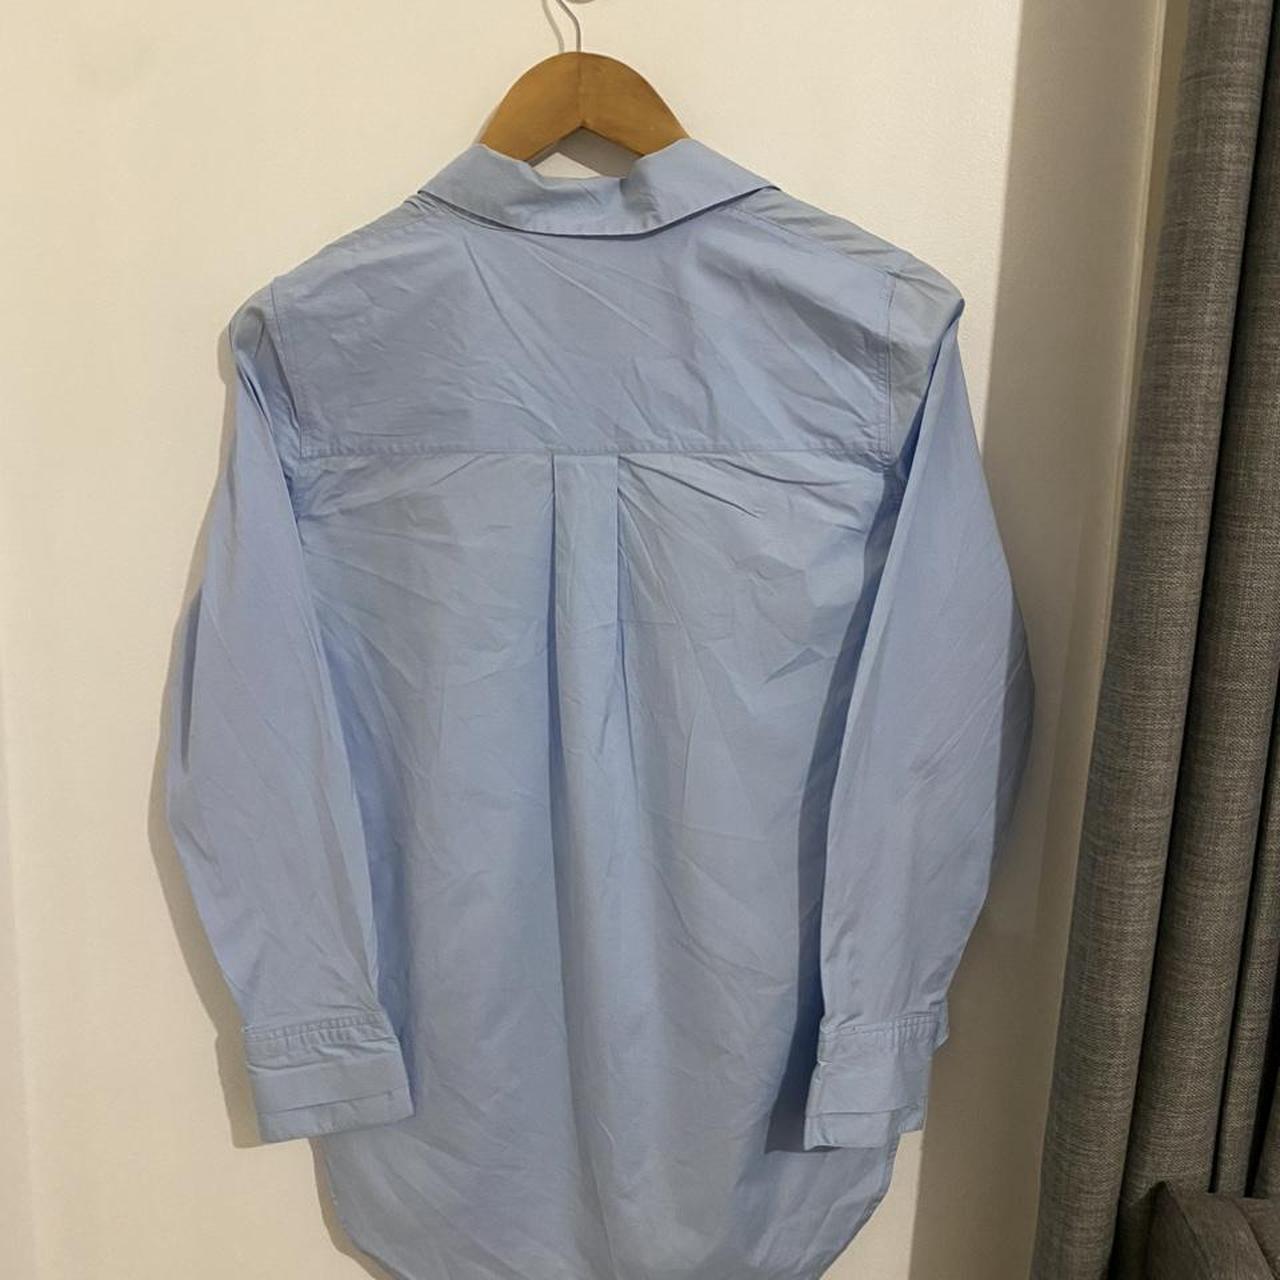 witchery button up in great condition - Depop